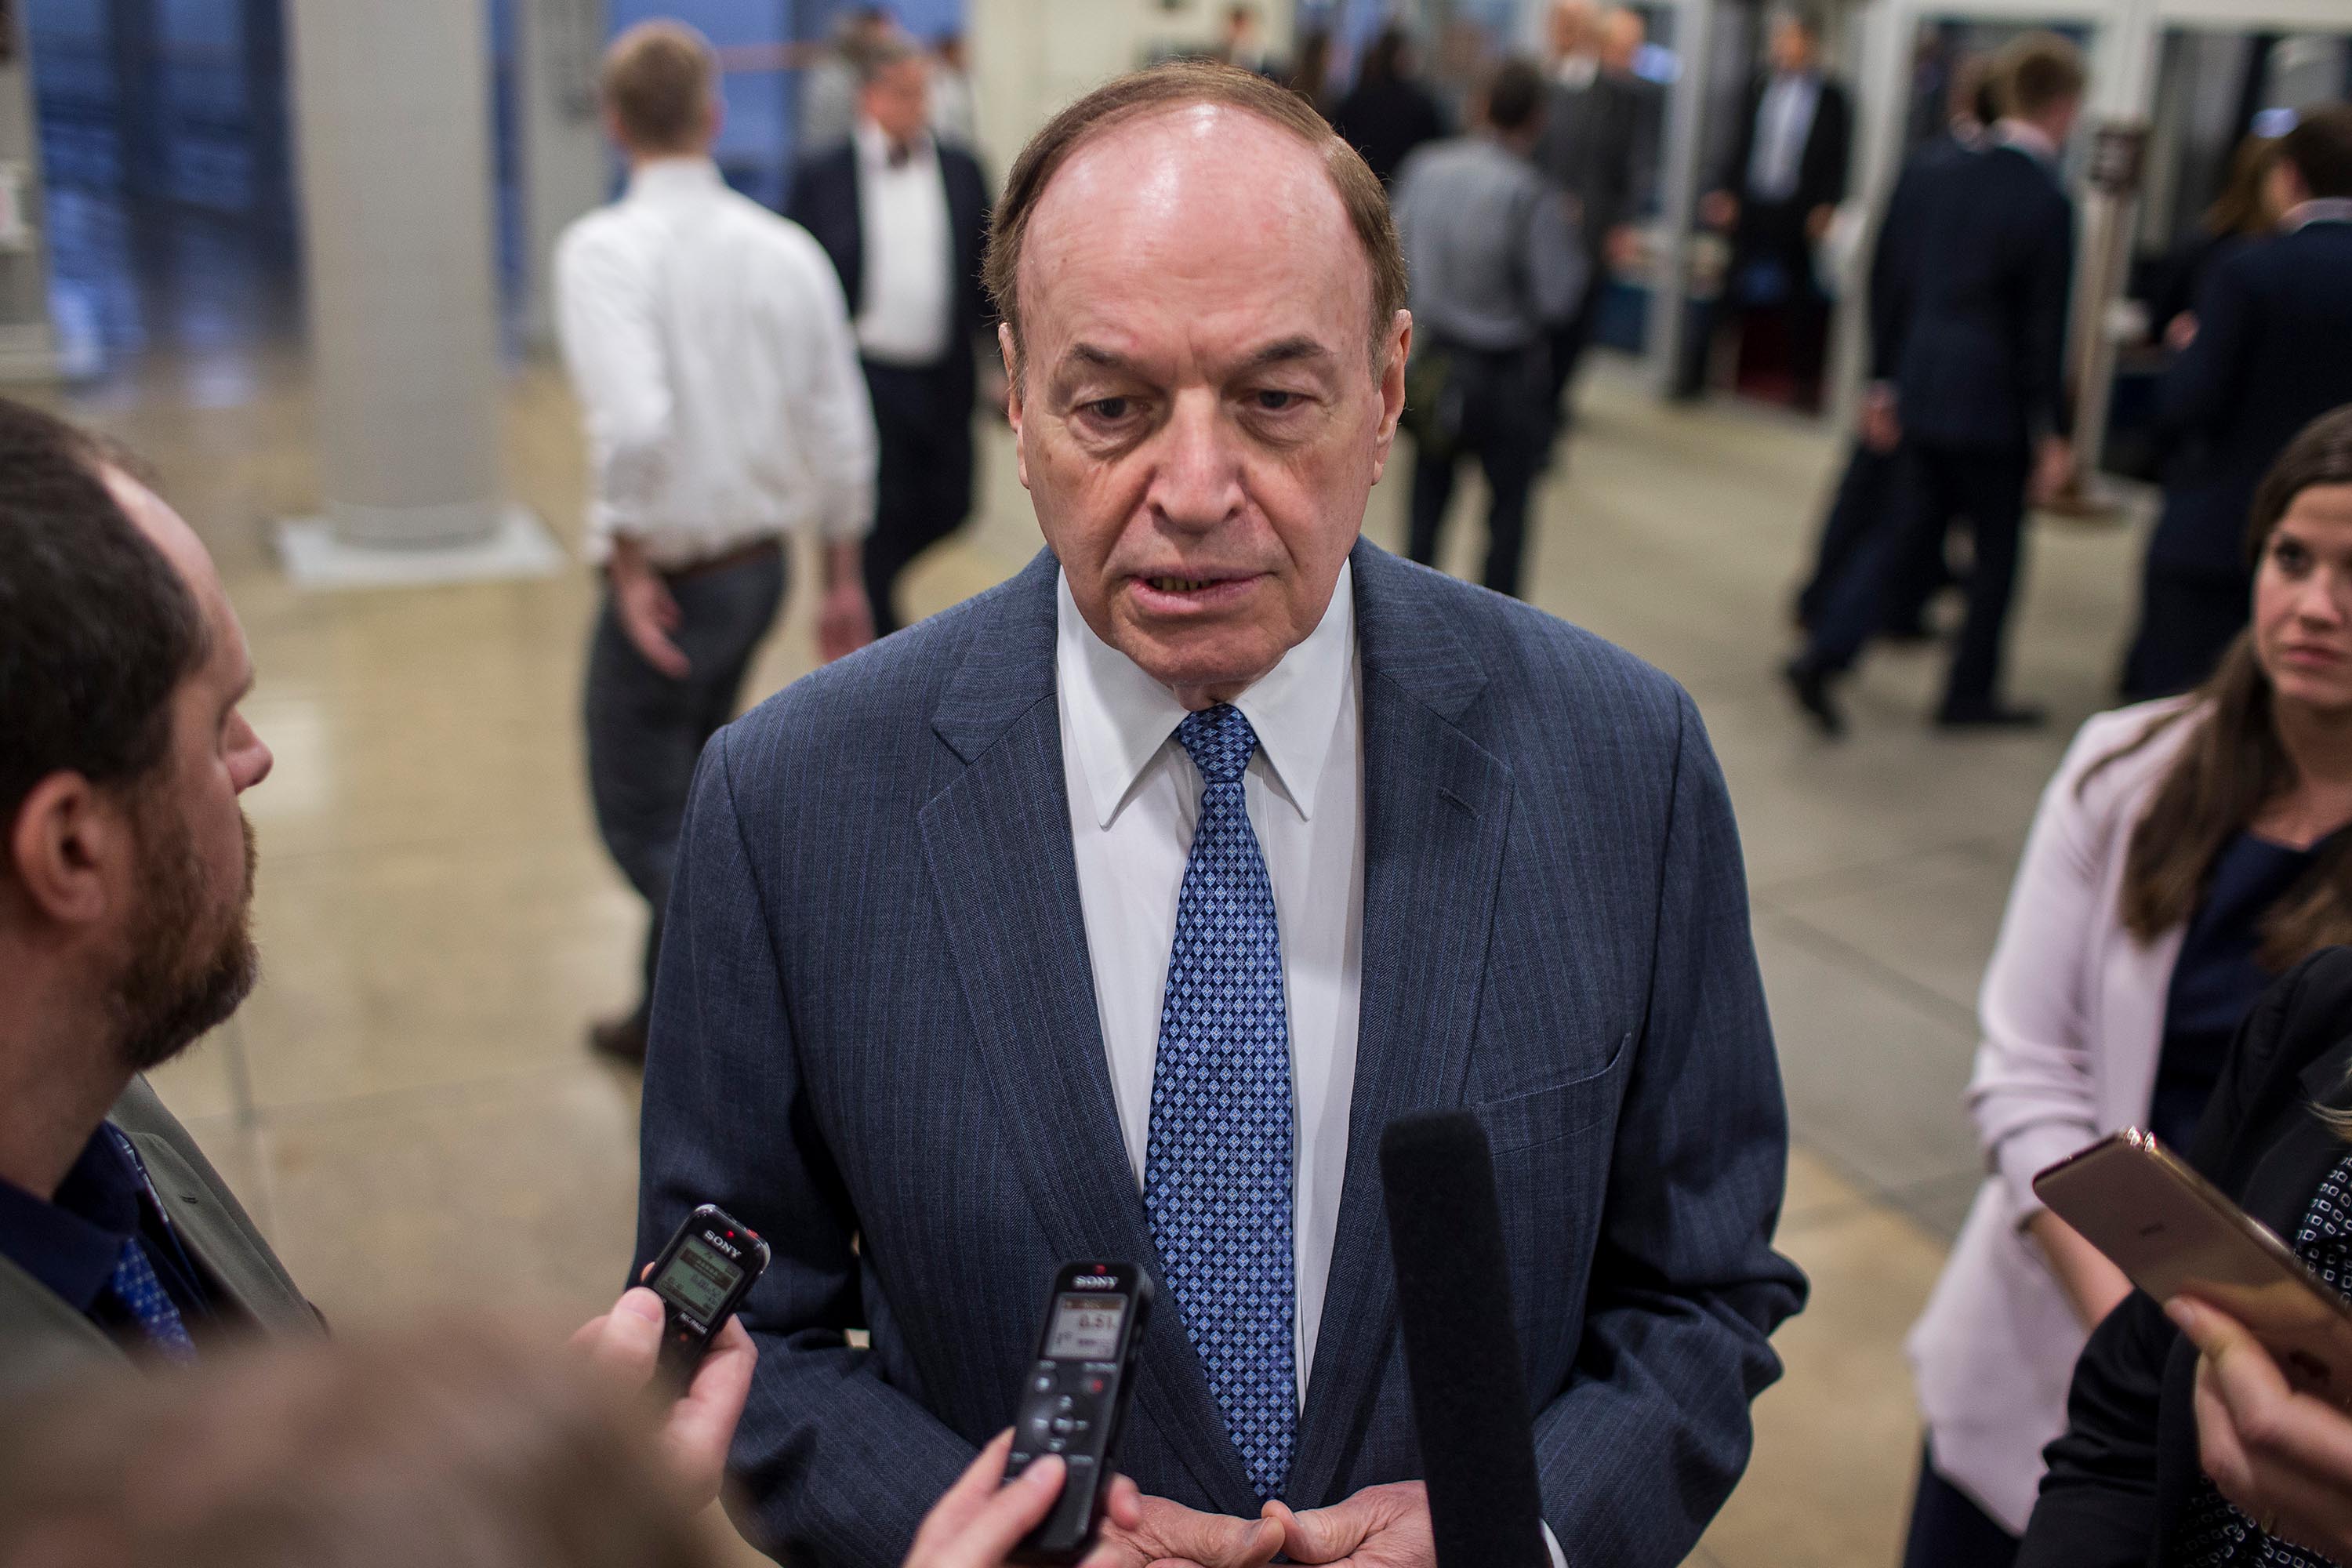 Sen. Richard Shelby speaks to reporters in the Senate basement before a weekly policy luncheon in April 2019.